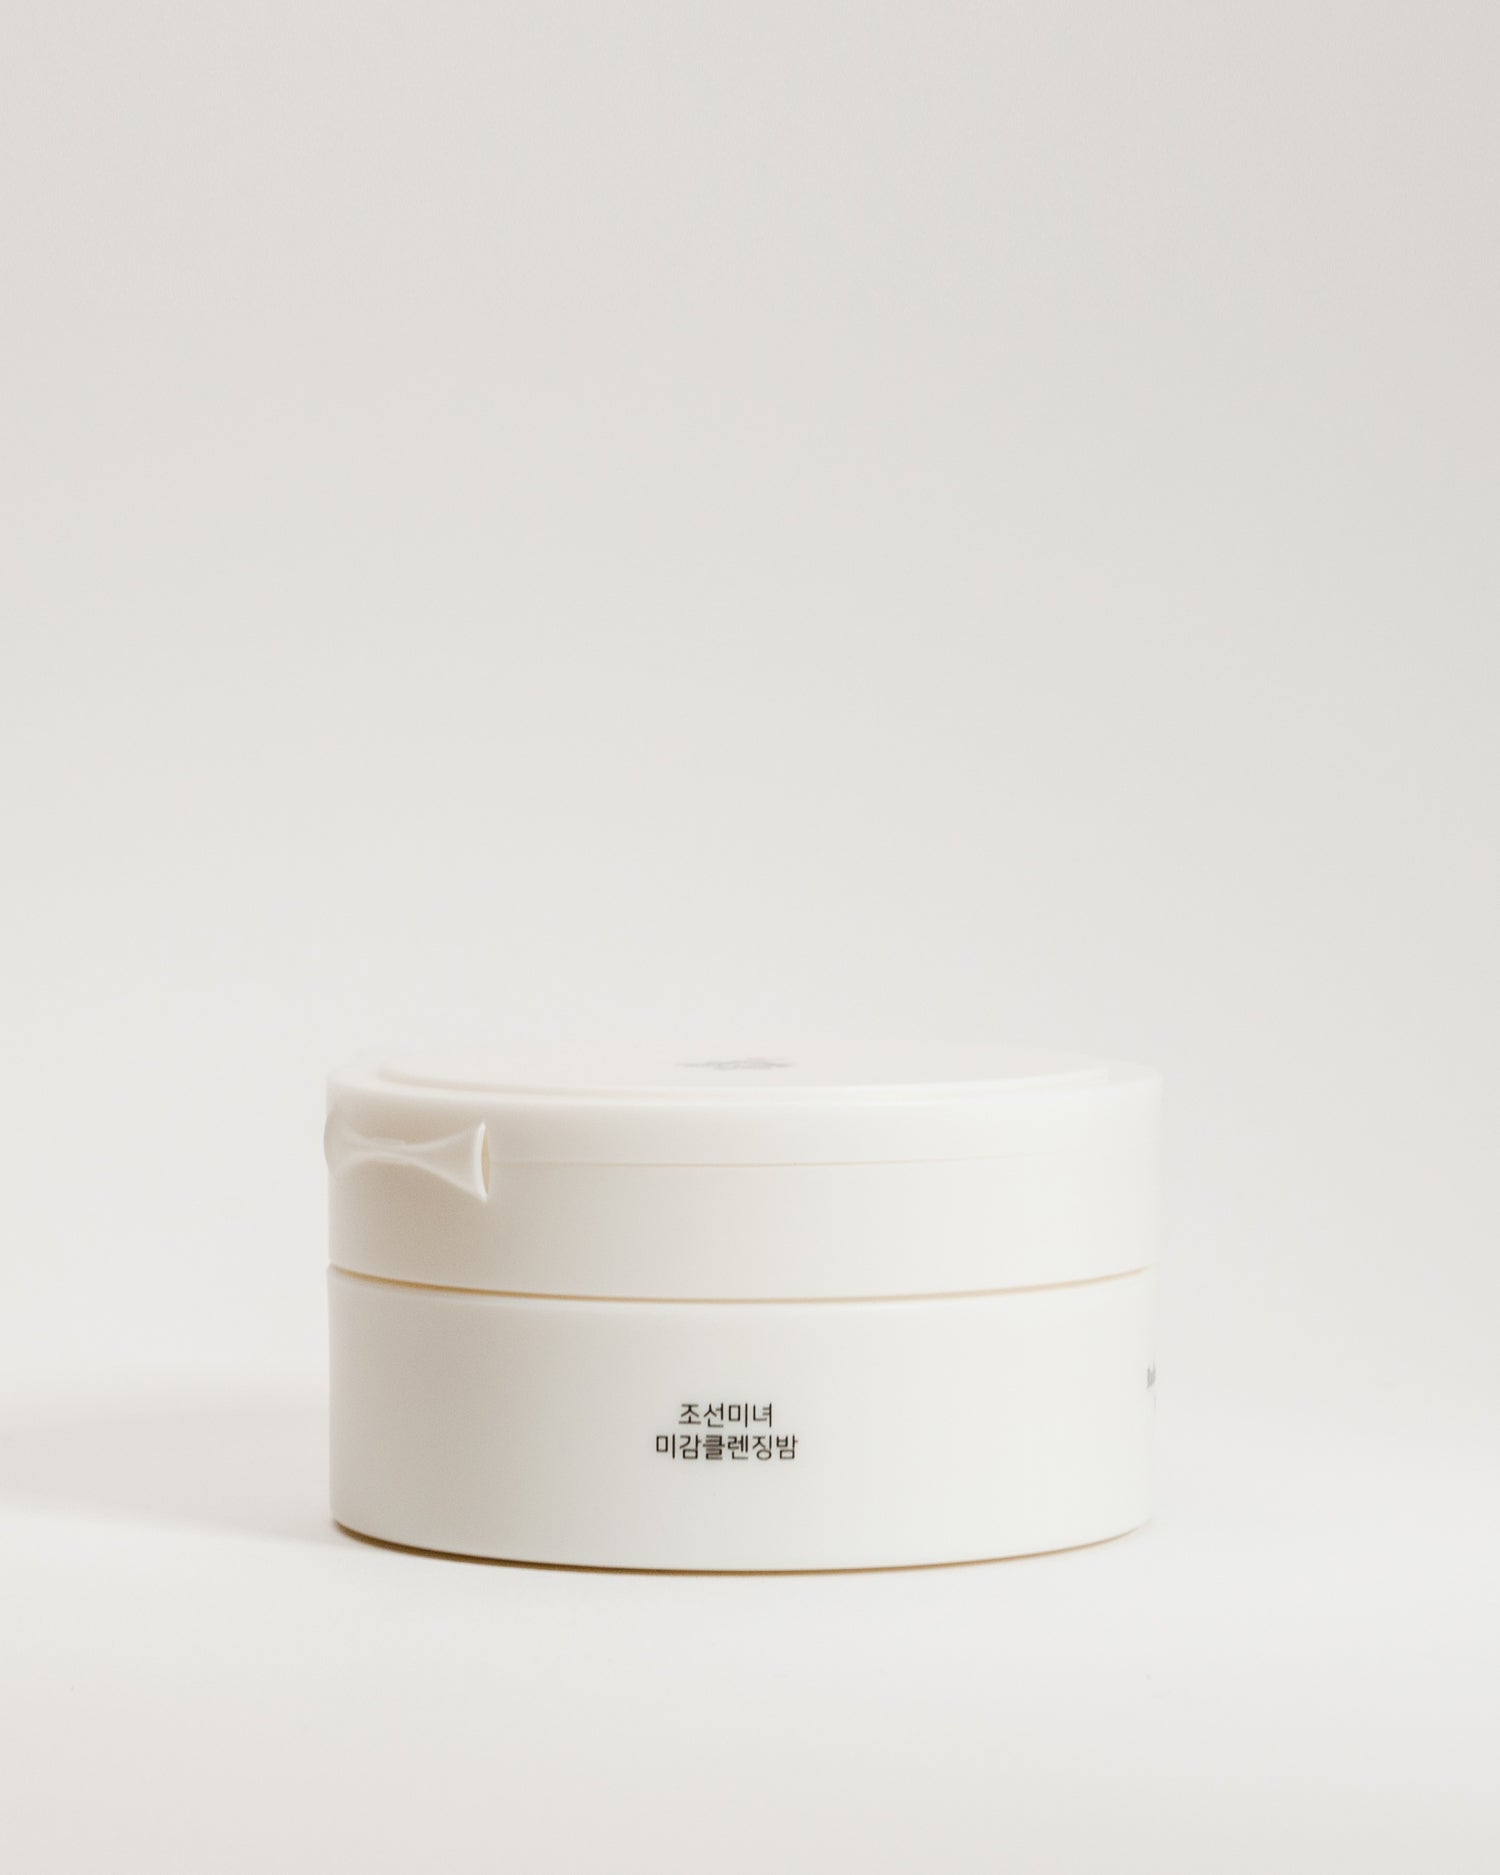 Beauty of Joseon Radiance Cleansing Balm